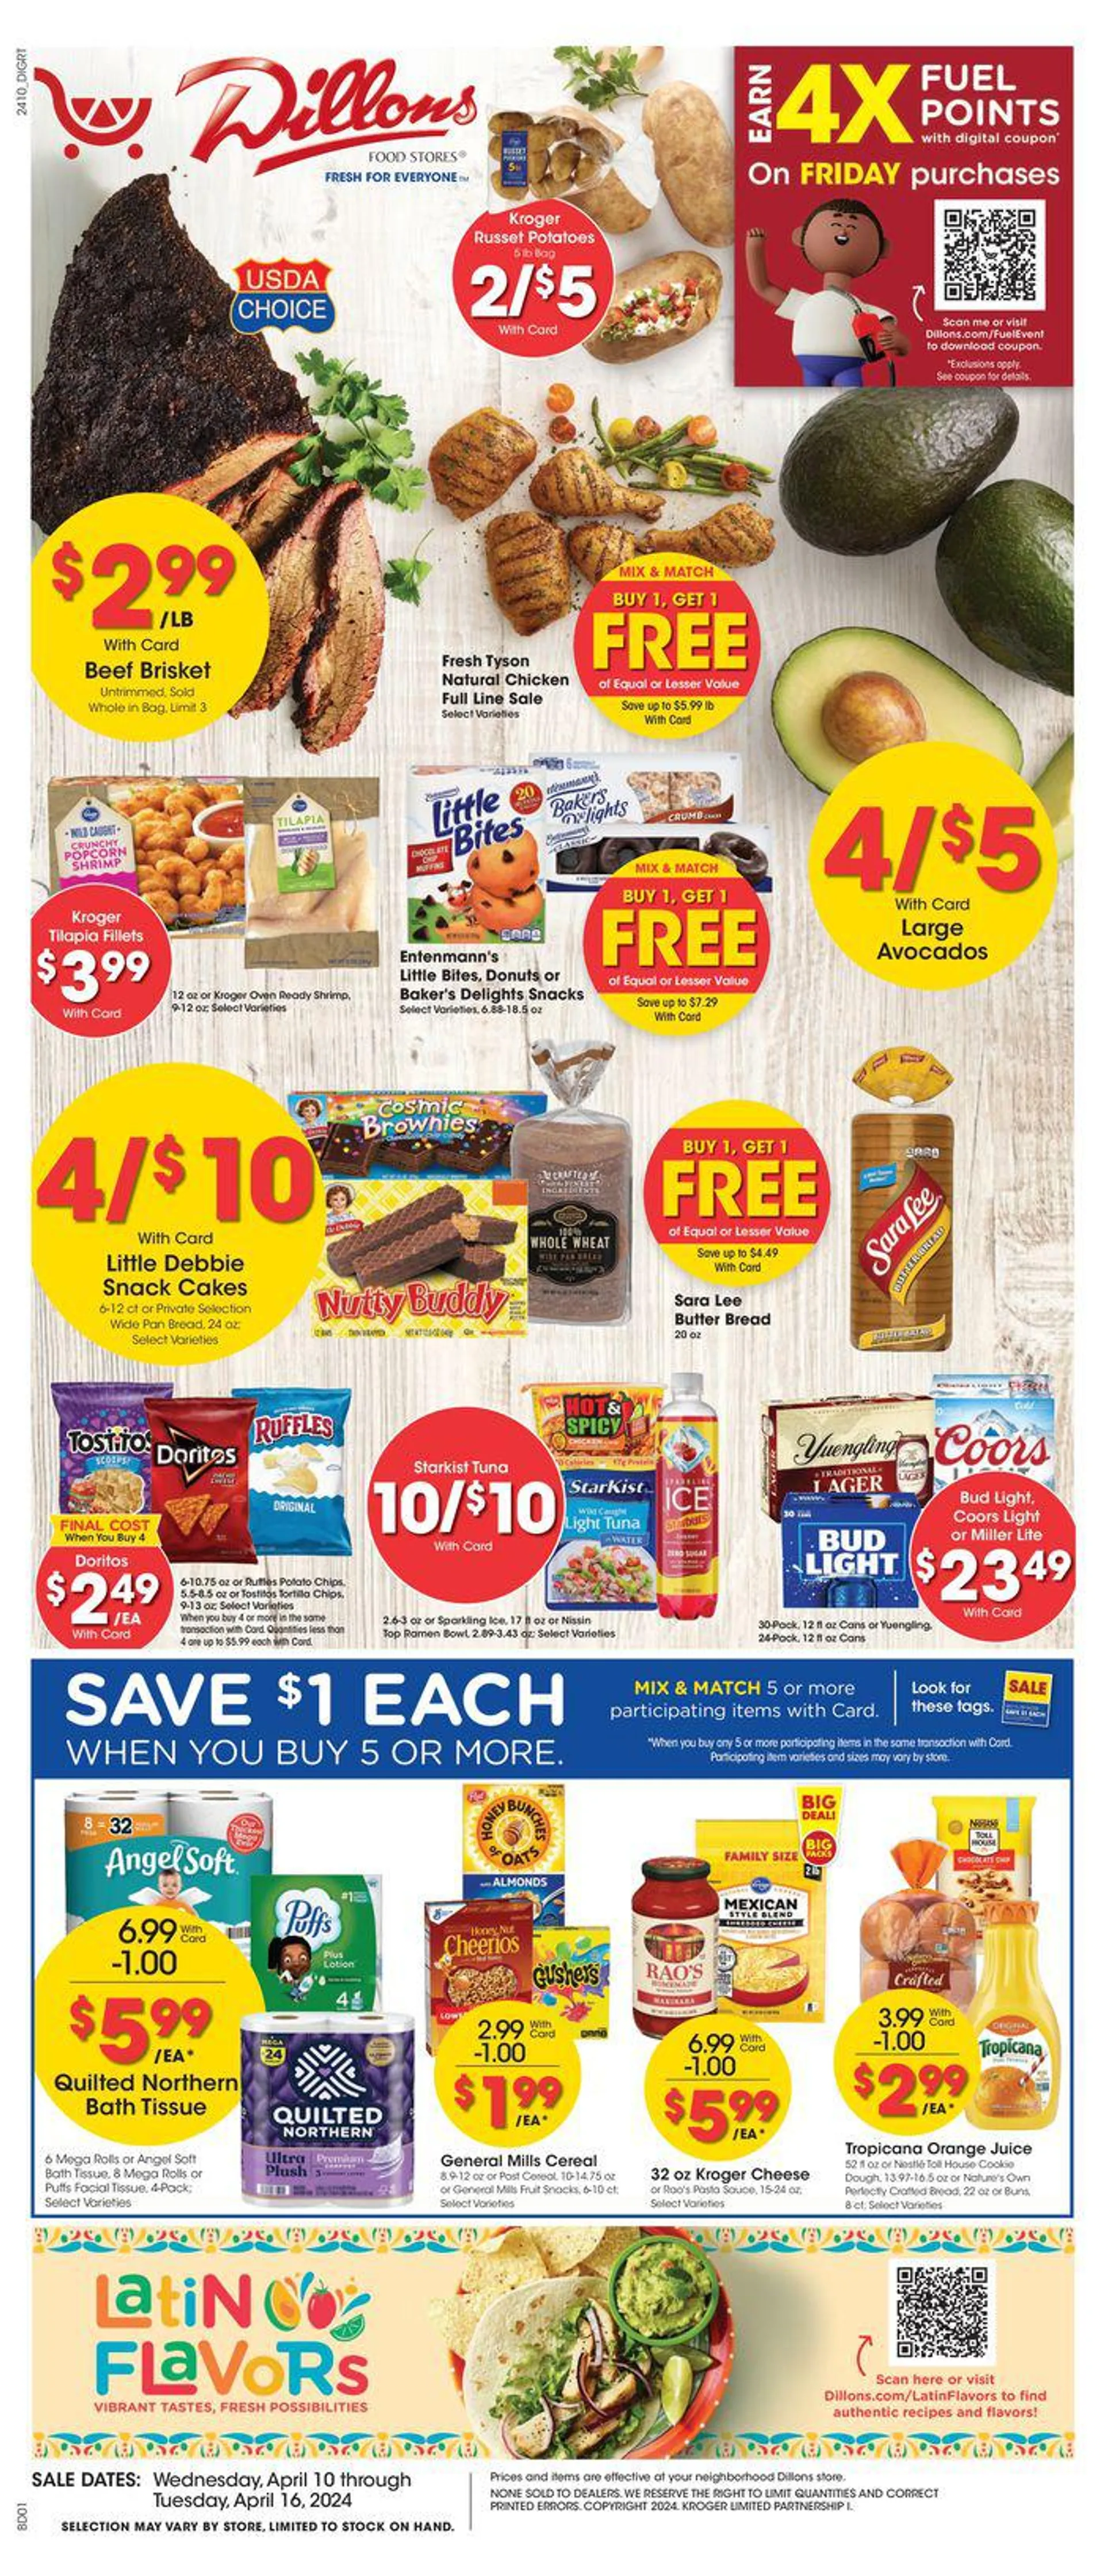 Weekly ad Weekly Ad 10/04 from April 10 to April 16 2024 - Page 1